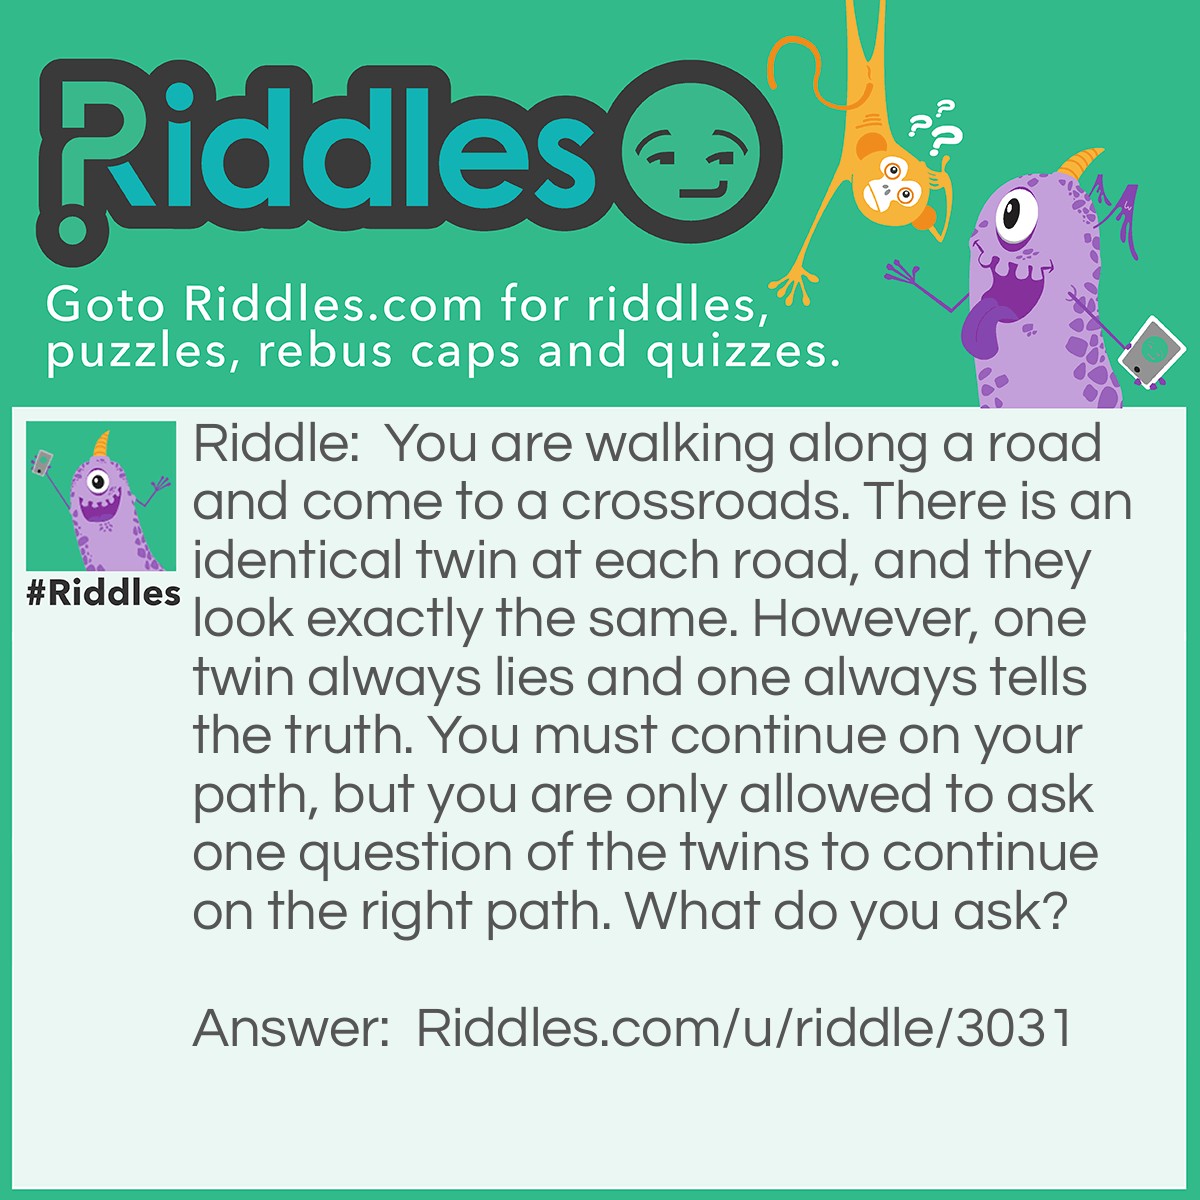 Riddle: You are walking along a road and come to a crossroads. There is an identical twin at each road, and they look exactly the same. However, one twin always lies and one always tells the truth. You must continue on your path, but you are only allowed to ask one question of the twins to continue on the right path. What do you ask? Answer: What would the other say? They will point you towards the wrong path, and you would take the other one.